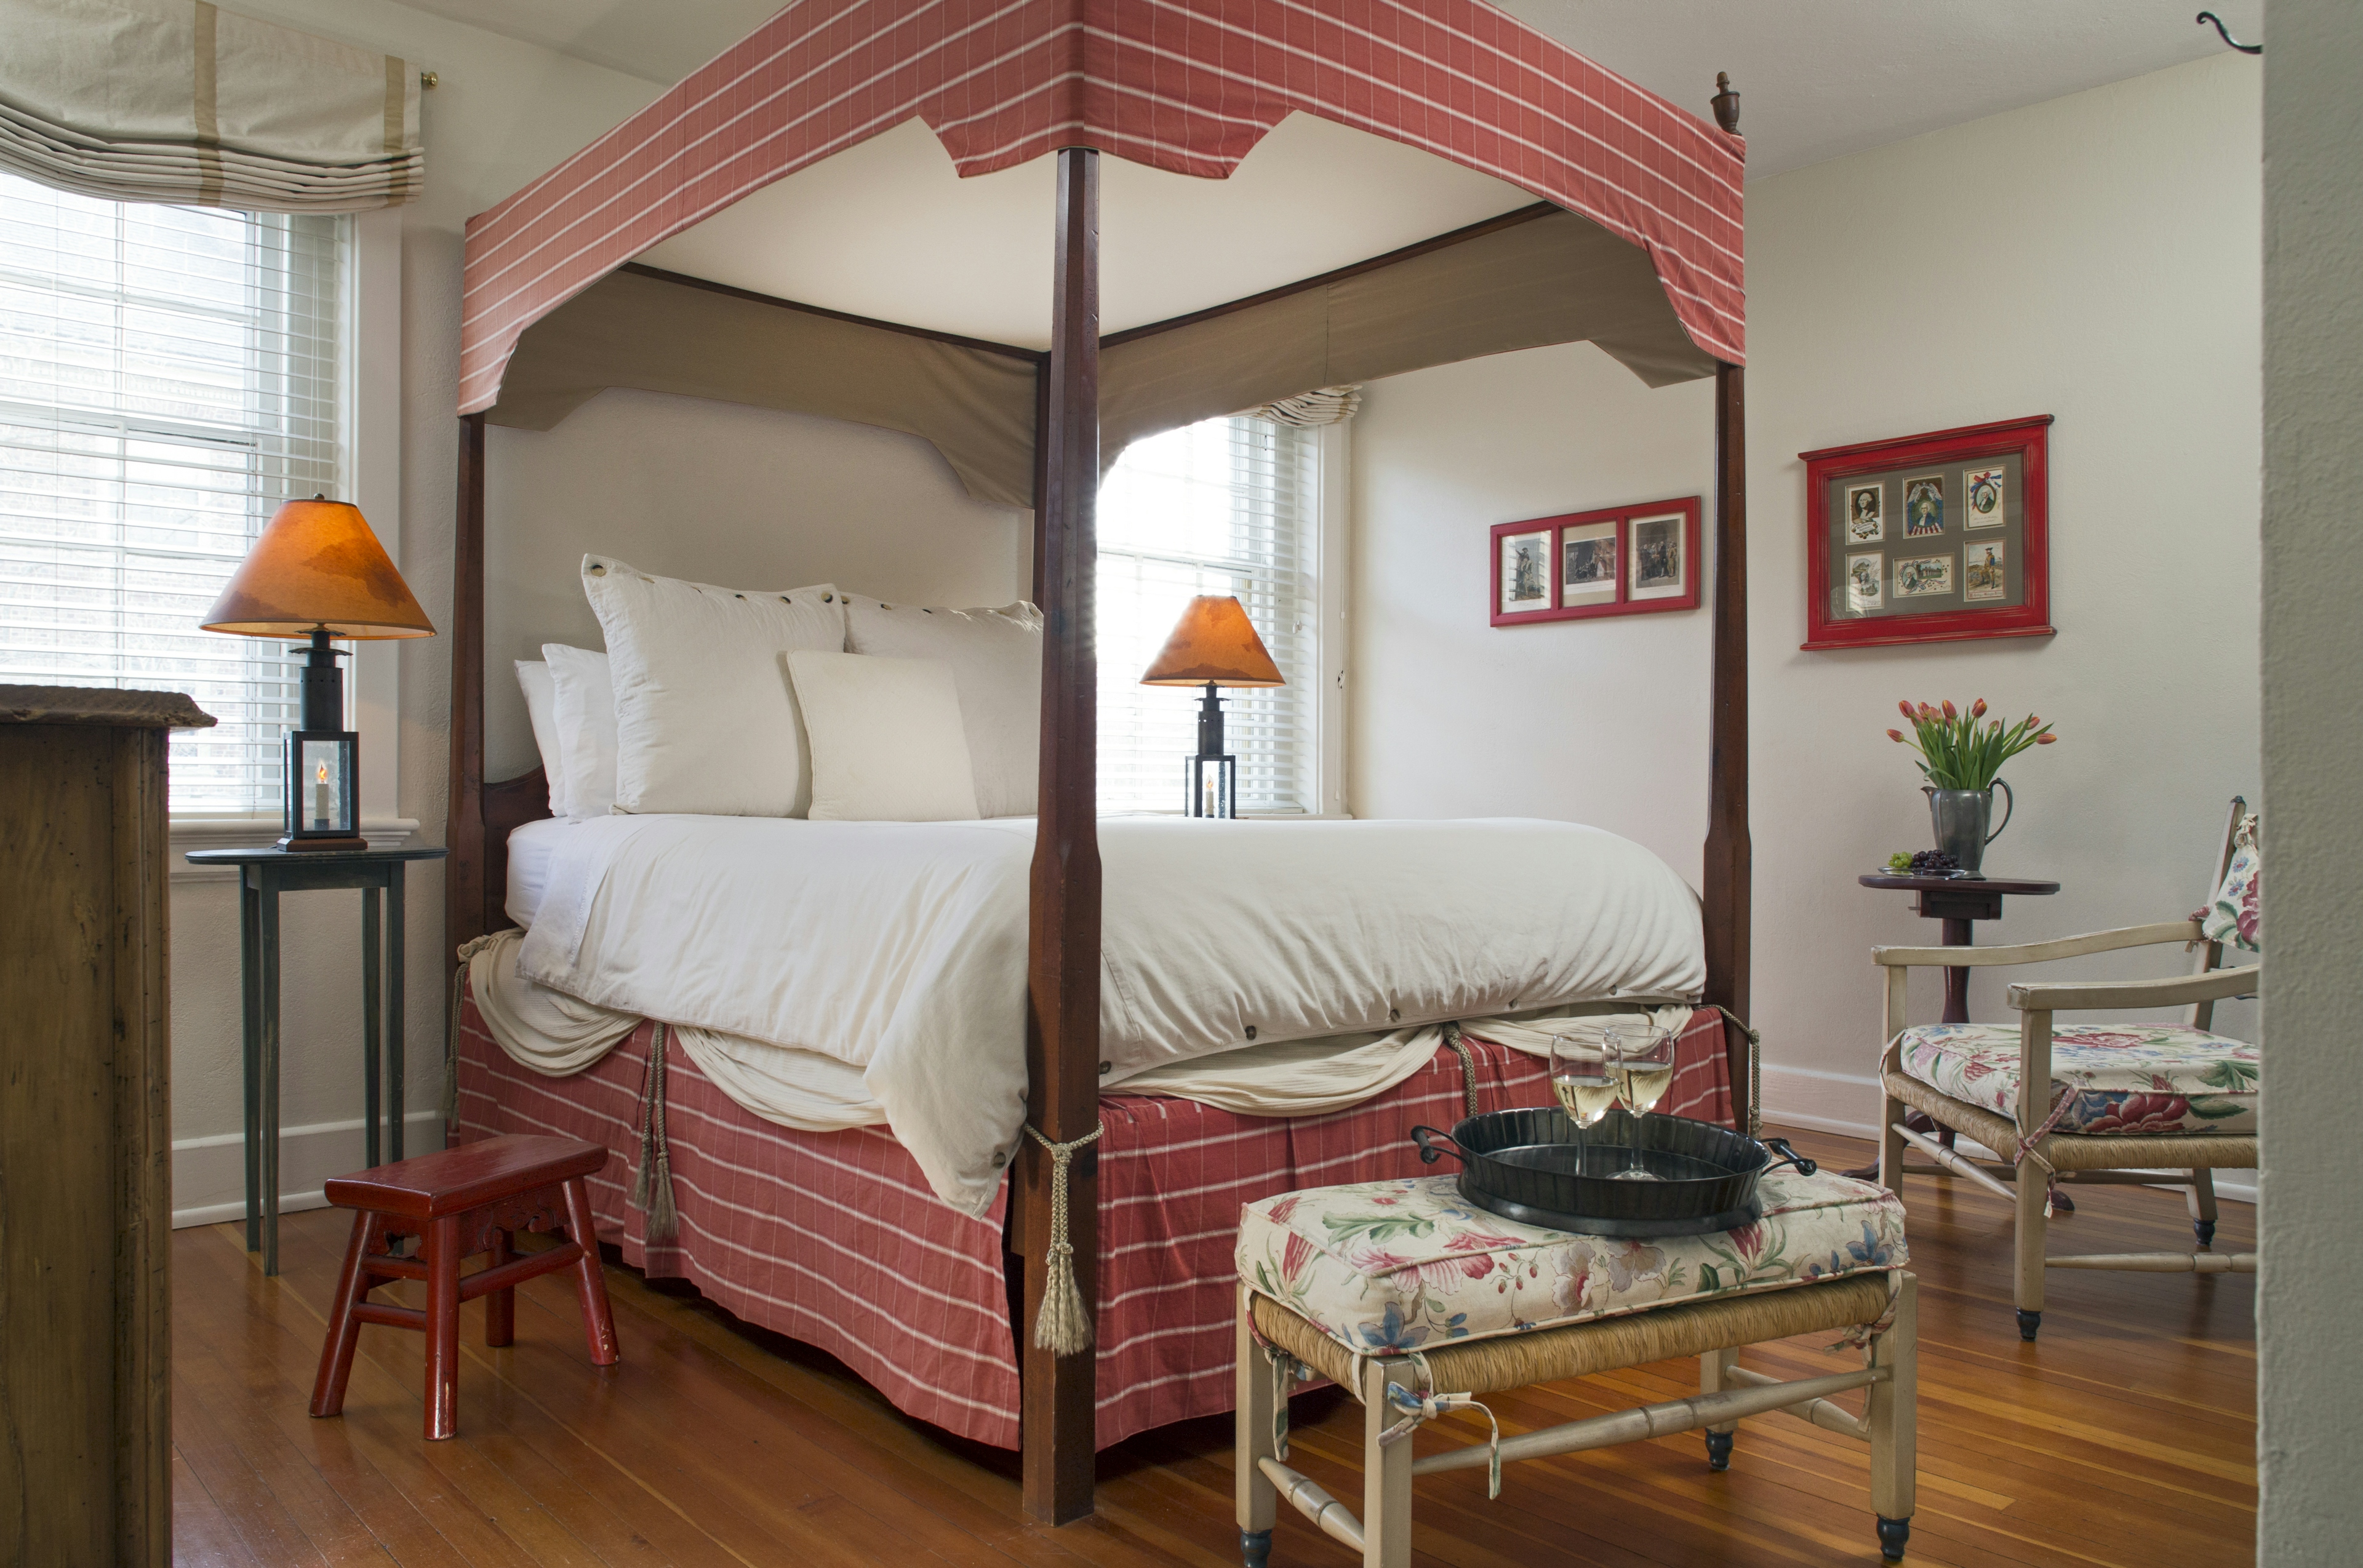 Lofty four-poster canopy bed with nightstands and lamps, hardwood floor, bench and chair with matching floral cushions